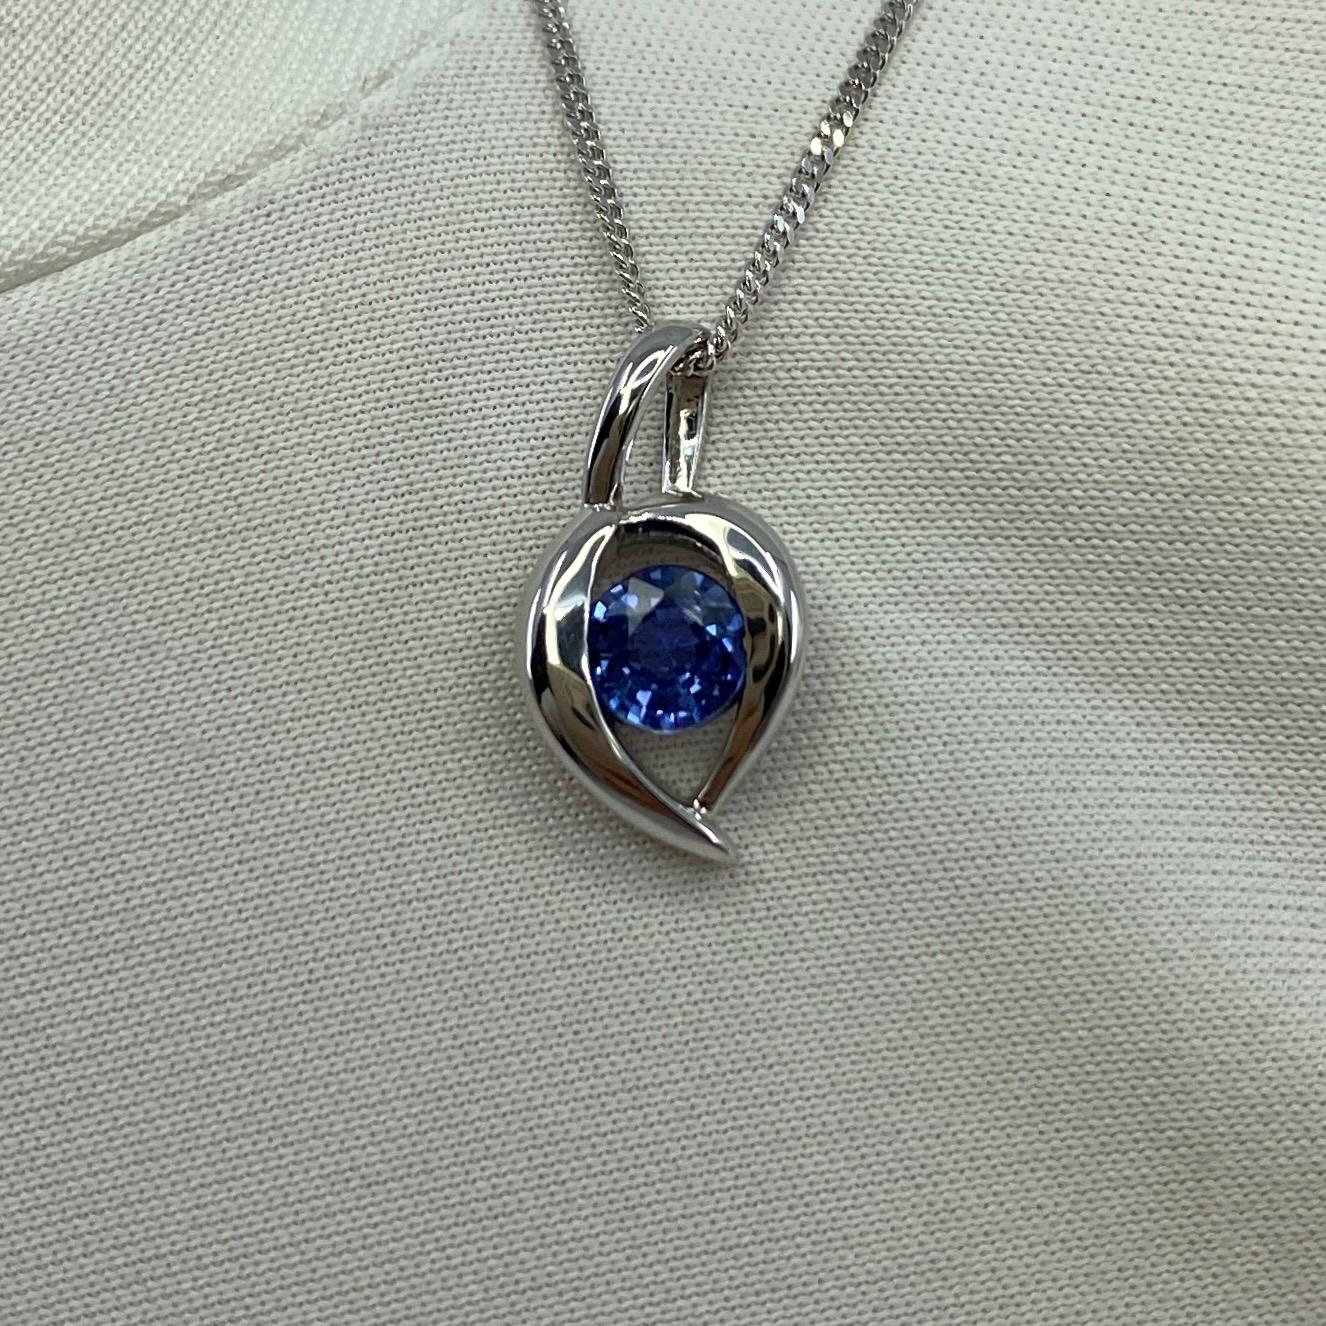 Fine Vivid Blue Ceylon Sapphire Round Cut 18k White Gold Solitaire Drop Pendant.

0.60 Carat sapphire with a beautiful vivid blue colour and excellent clarity, very clean stone. Also has an excellent round brilliant cut showing lots of light return